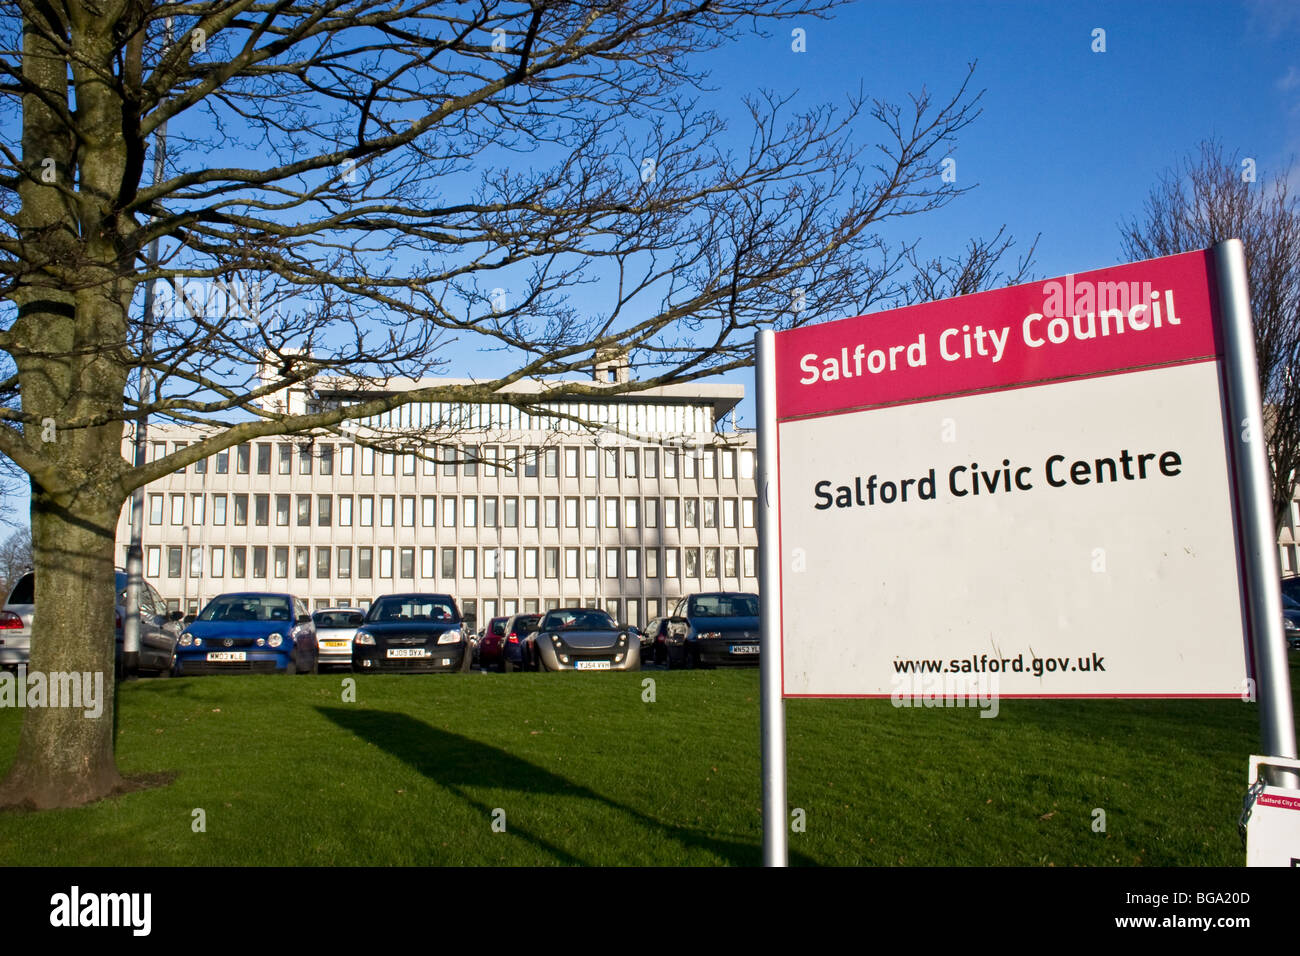 Salford City Council Civic Centre, Swinton, Salford, Greater Manchester, UK Stock Photo